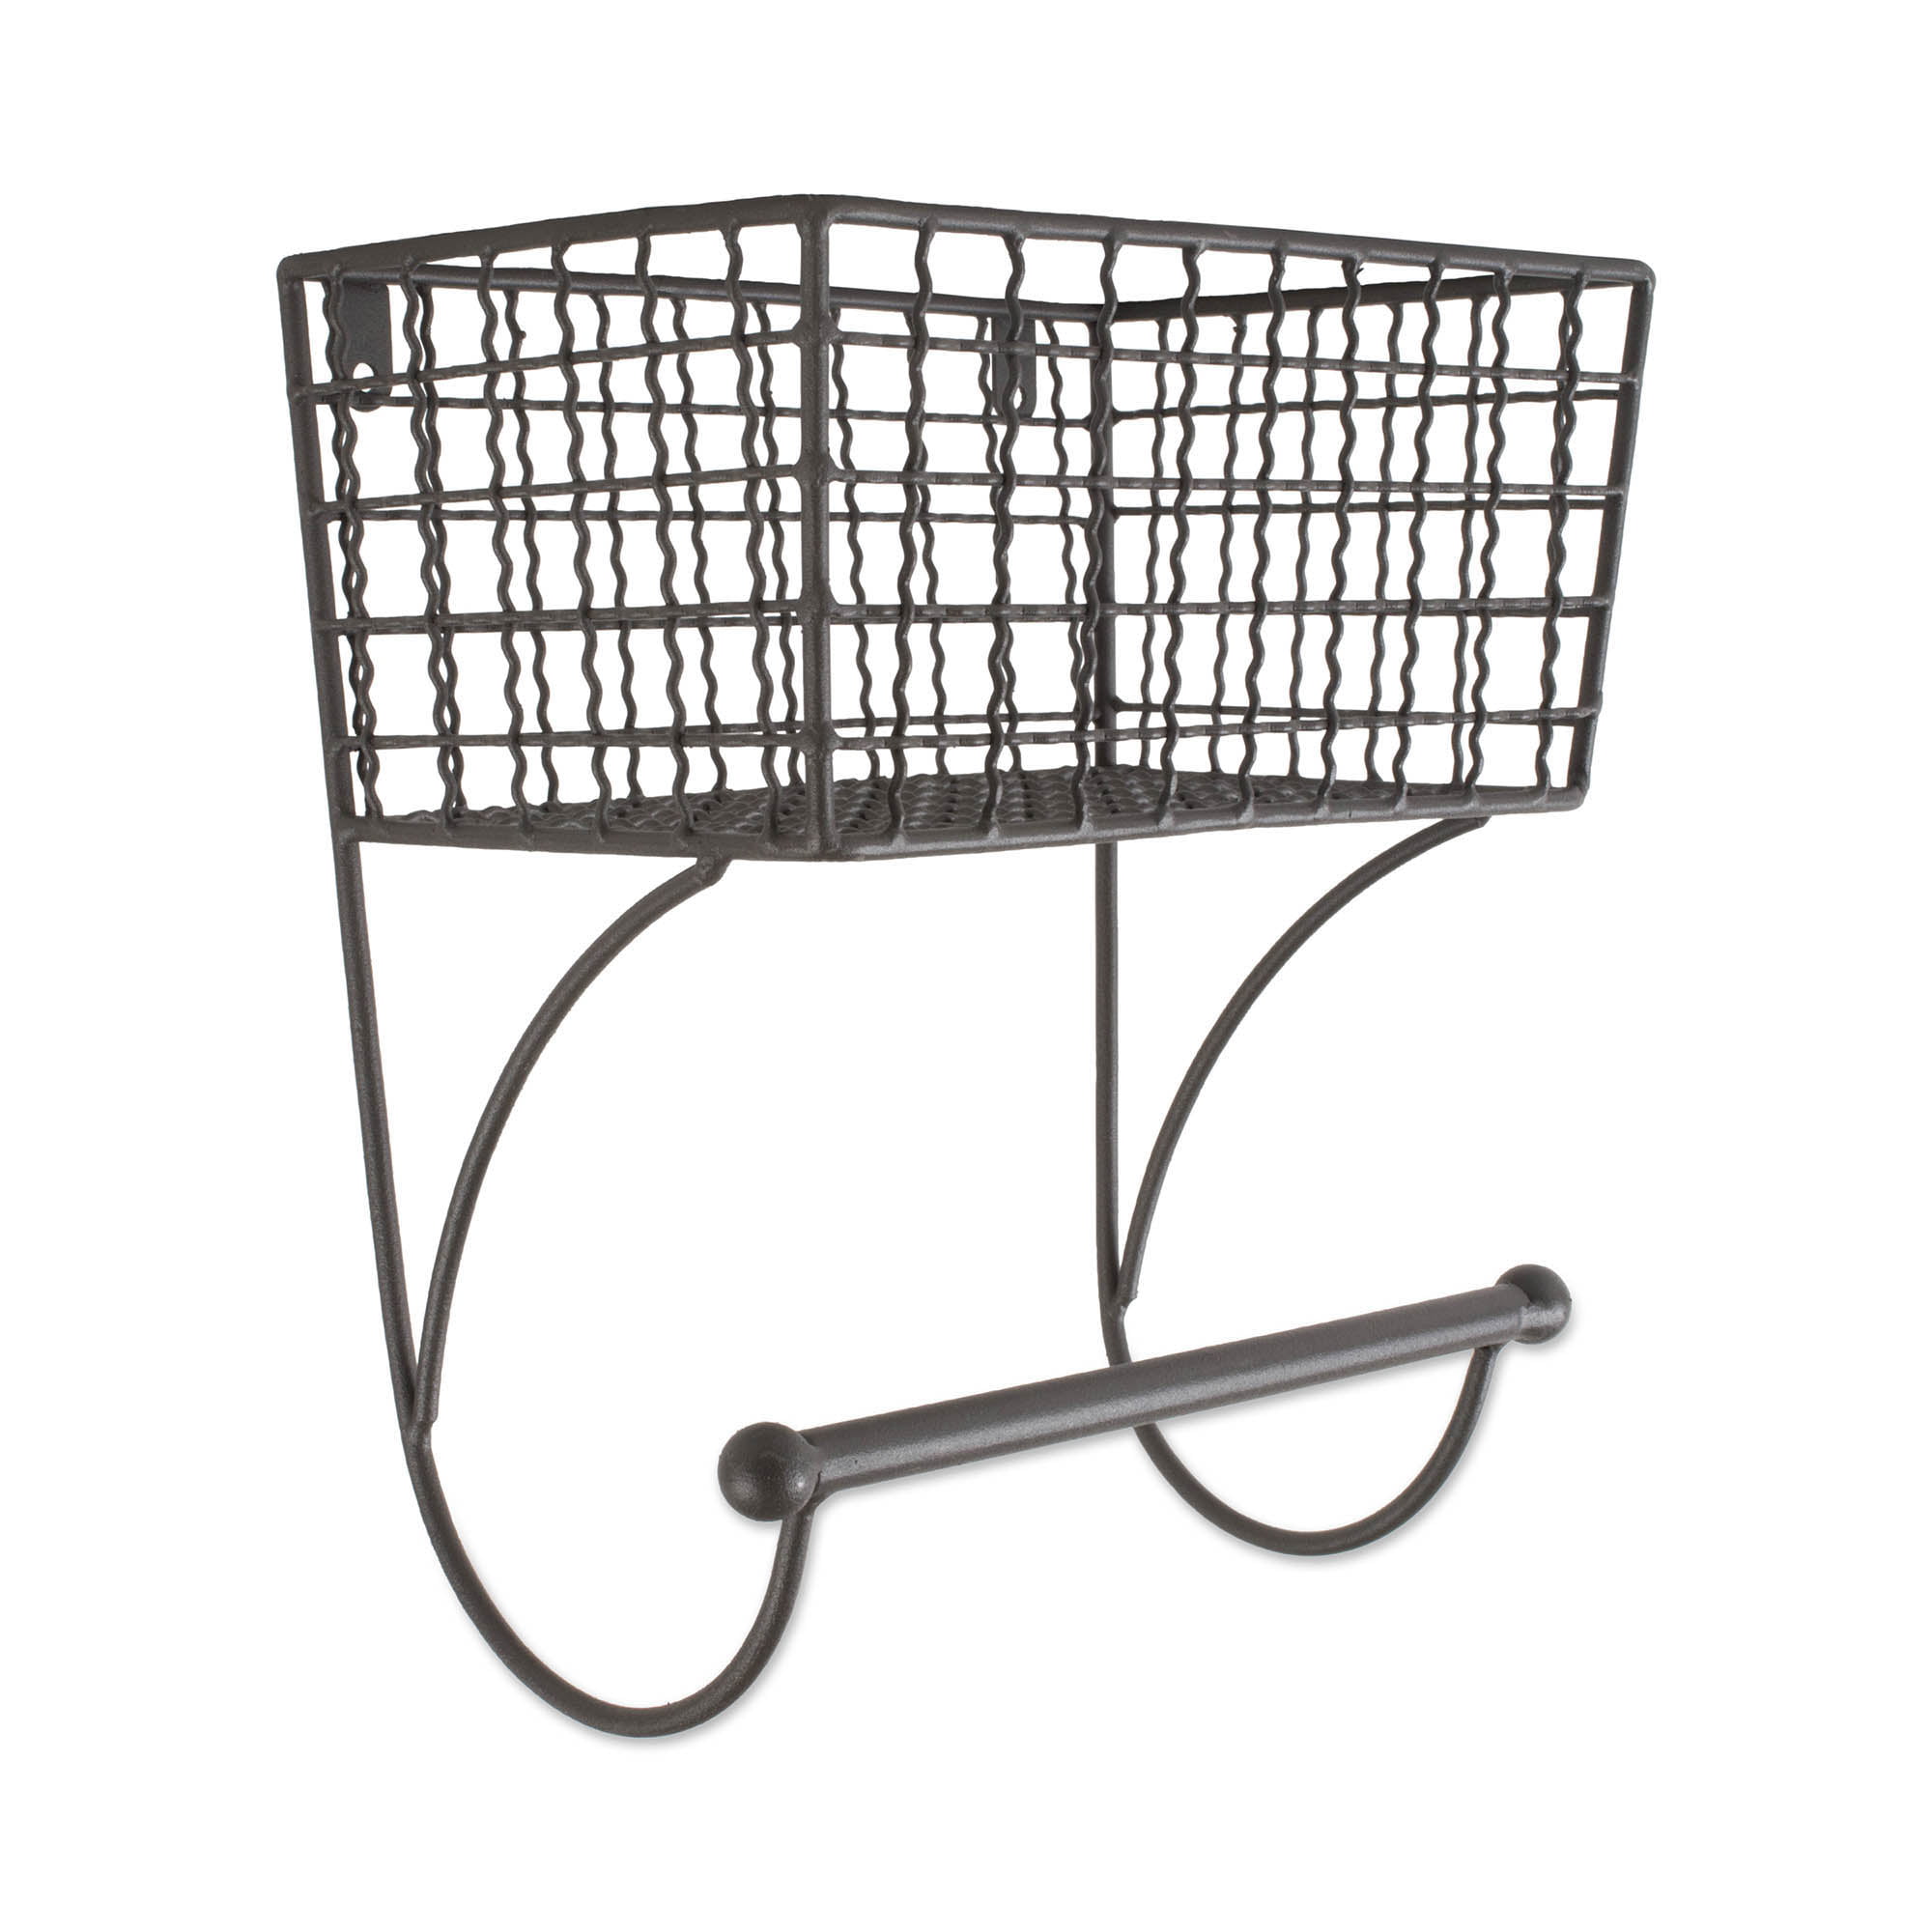 New Retro Antique Vintage Style Wire Hand Towel Holder Hanger Bar Wall Rack 